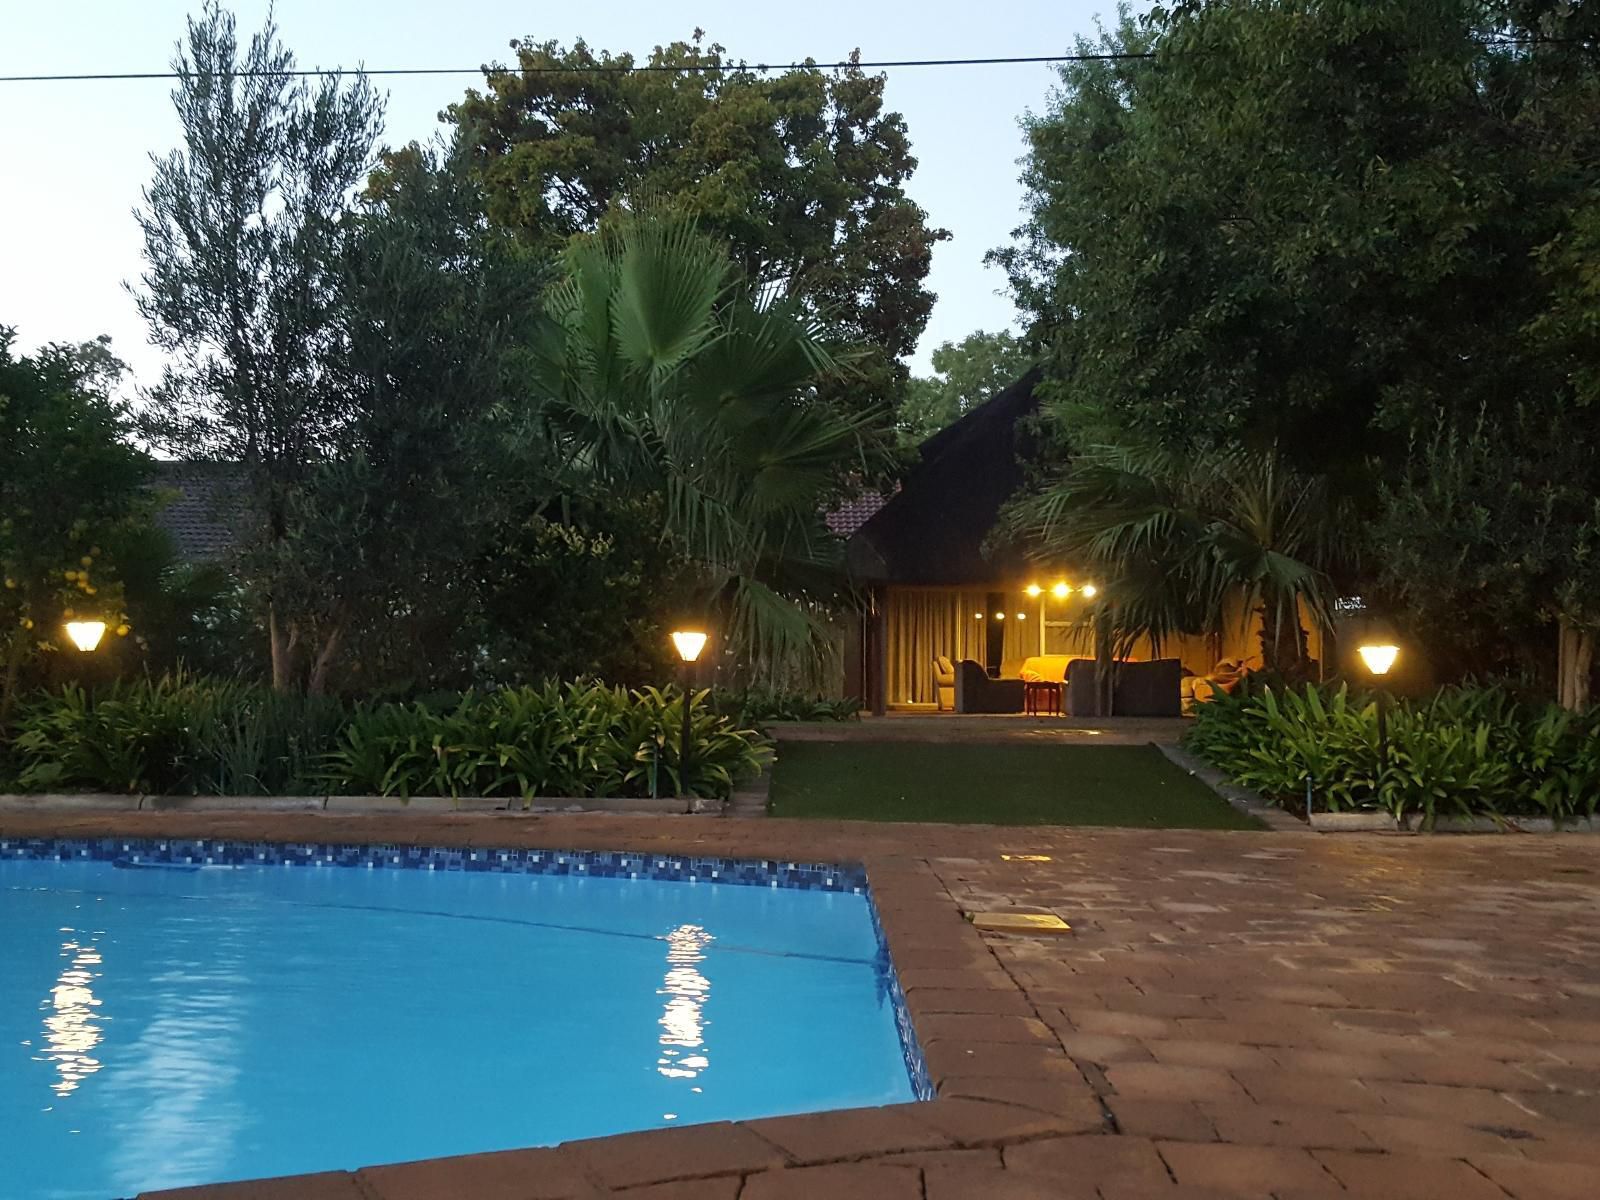 Acacia Lodge Fichardt Park Bloemfontein Free State South Africa House, Building, Architecture, Palm Tree, Plant, Nature, Wood, Garden, Swimming Pool